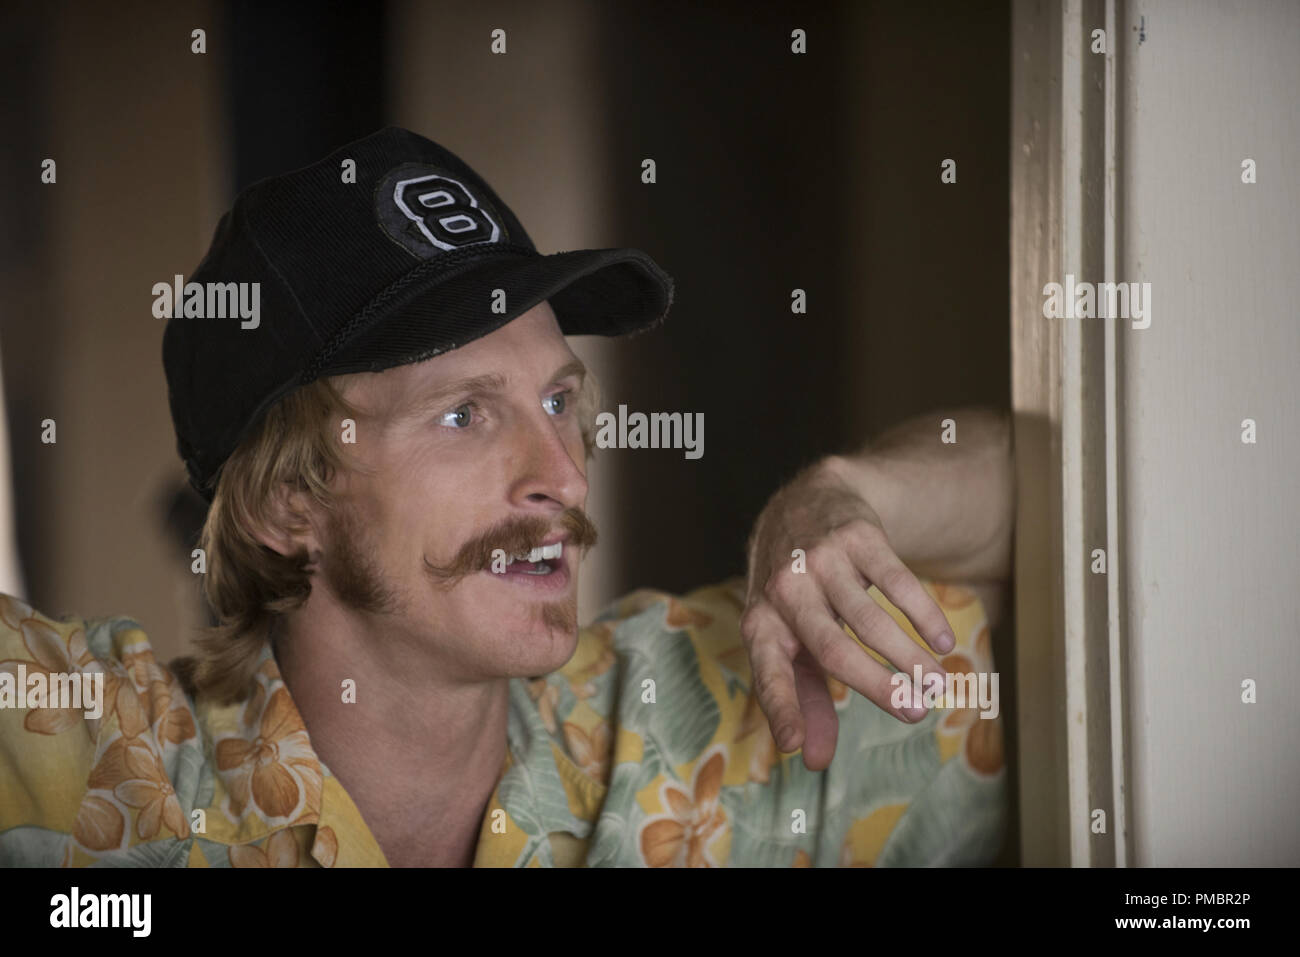 Austin Amelio plays Nesbit in Everybody Wants Some from Paramount Pictures and Annapurna Pictures. Stock Photo